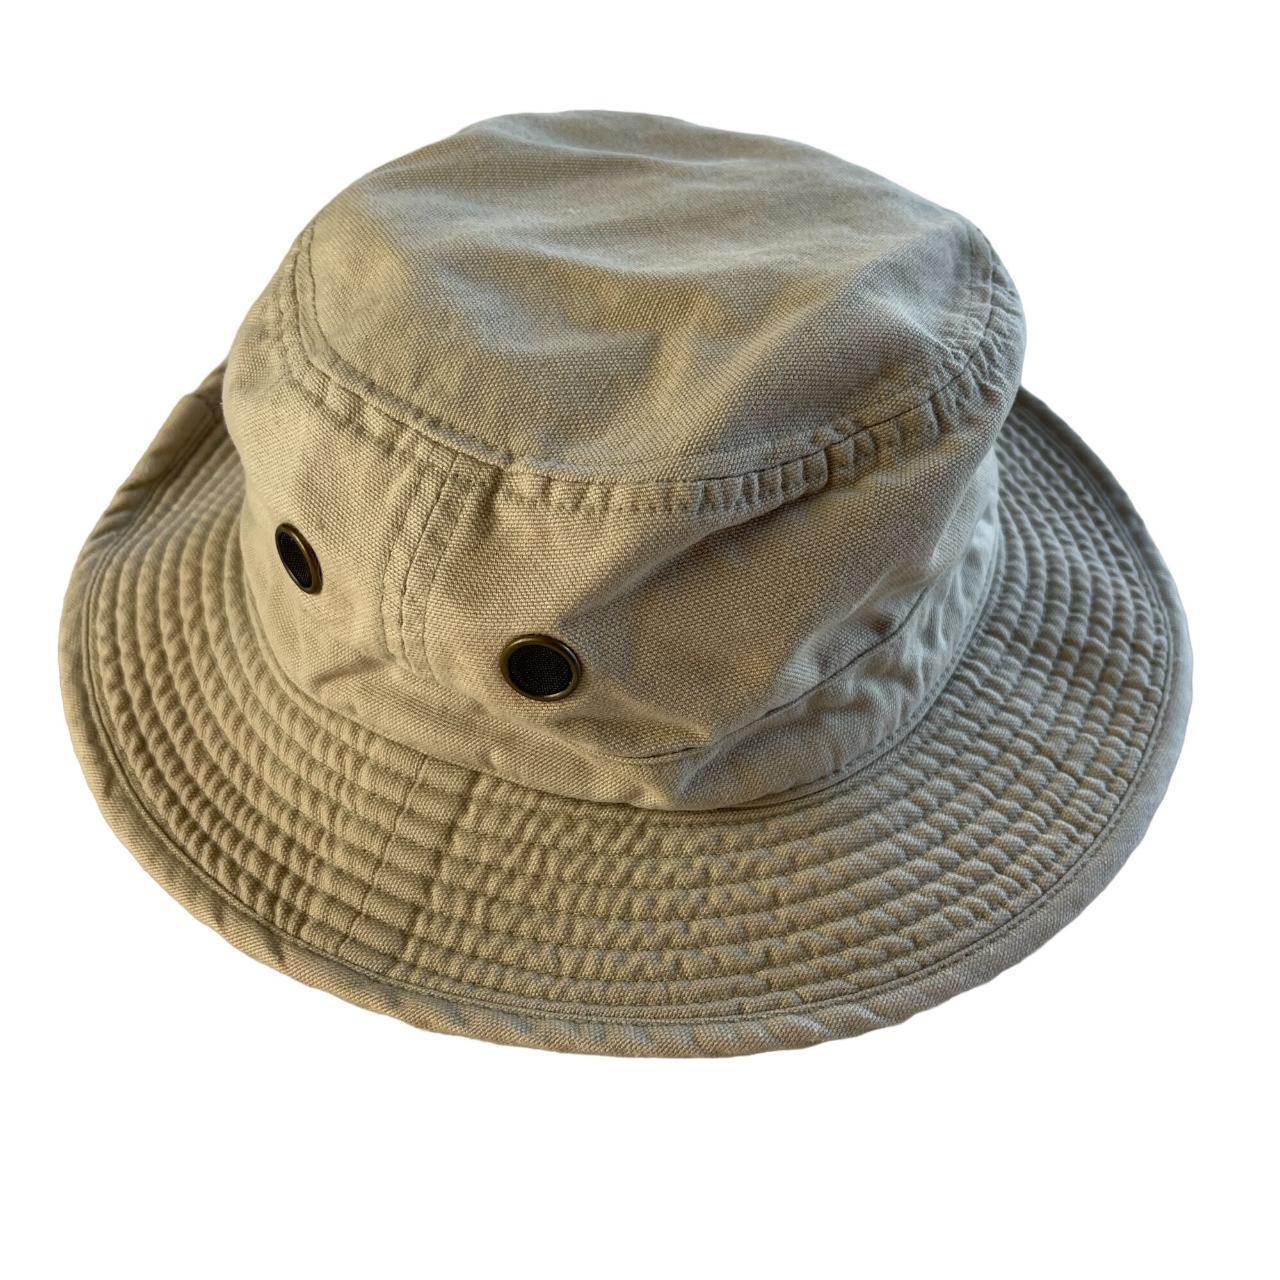 REI hiking bucket hat Hmu if you have any questions - Depop